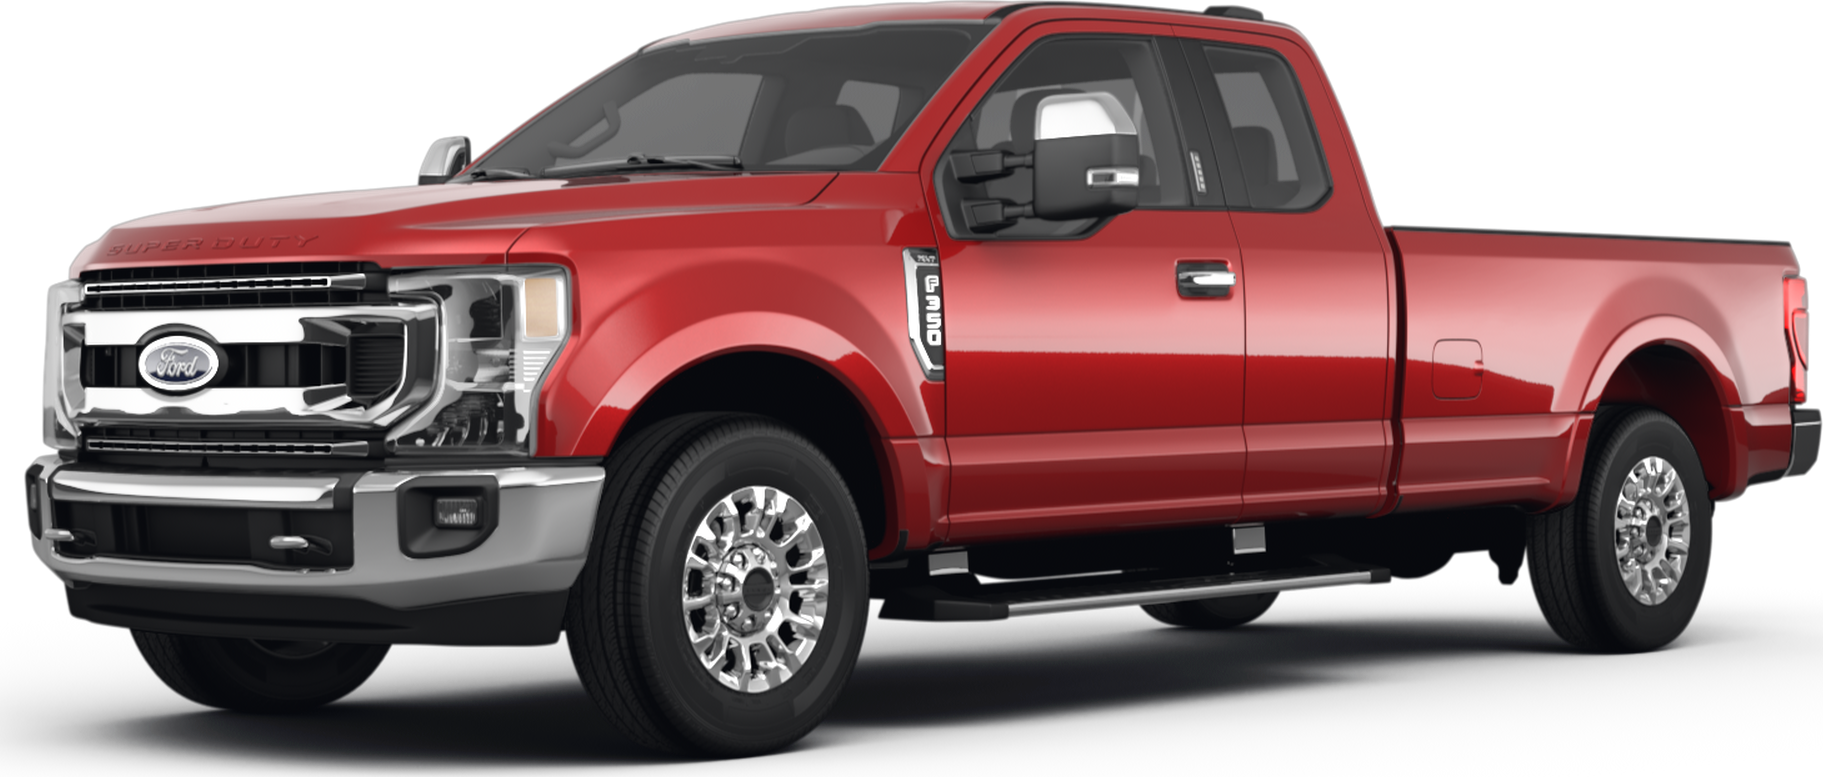 2022 Ford F350 Super Duty Super Cab Price, Value, Ratings & Reviews